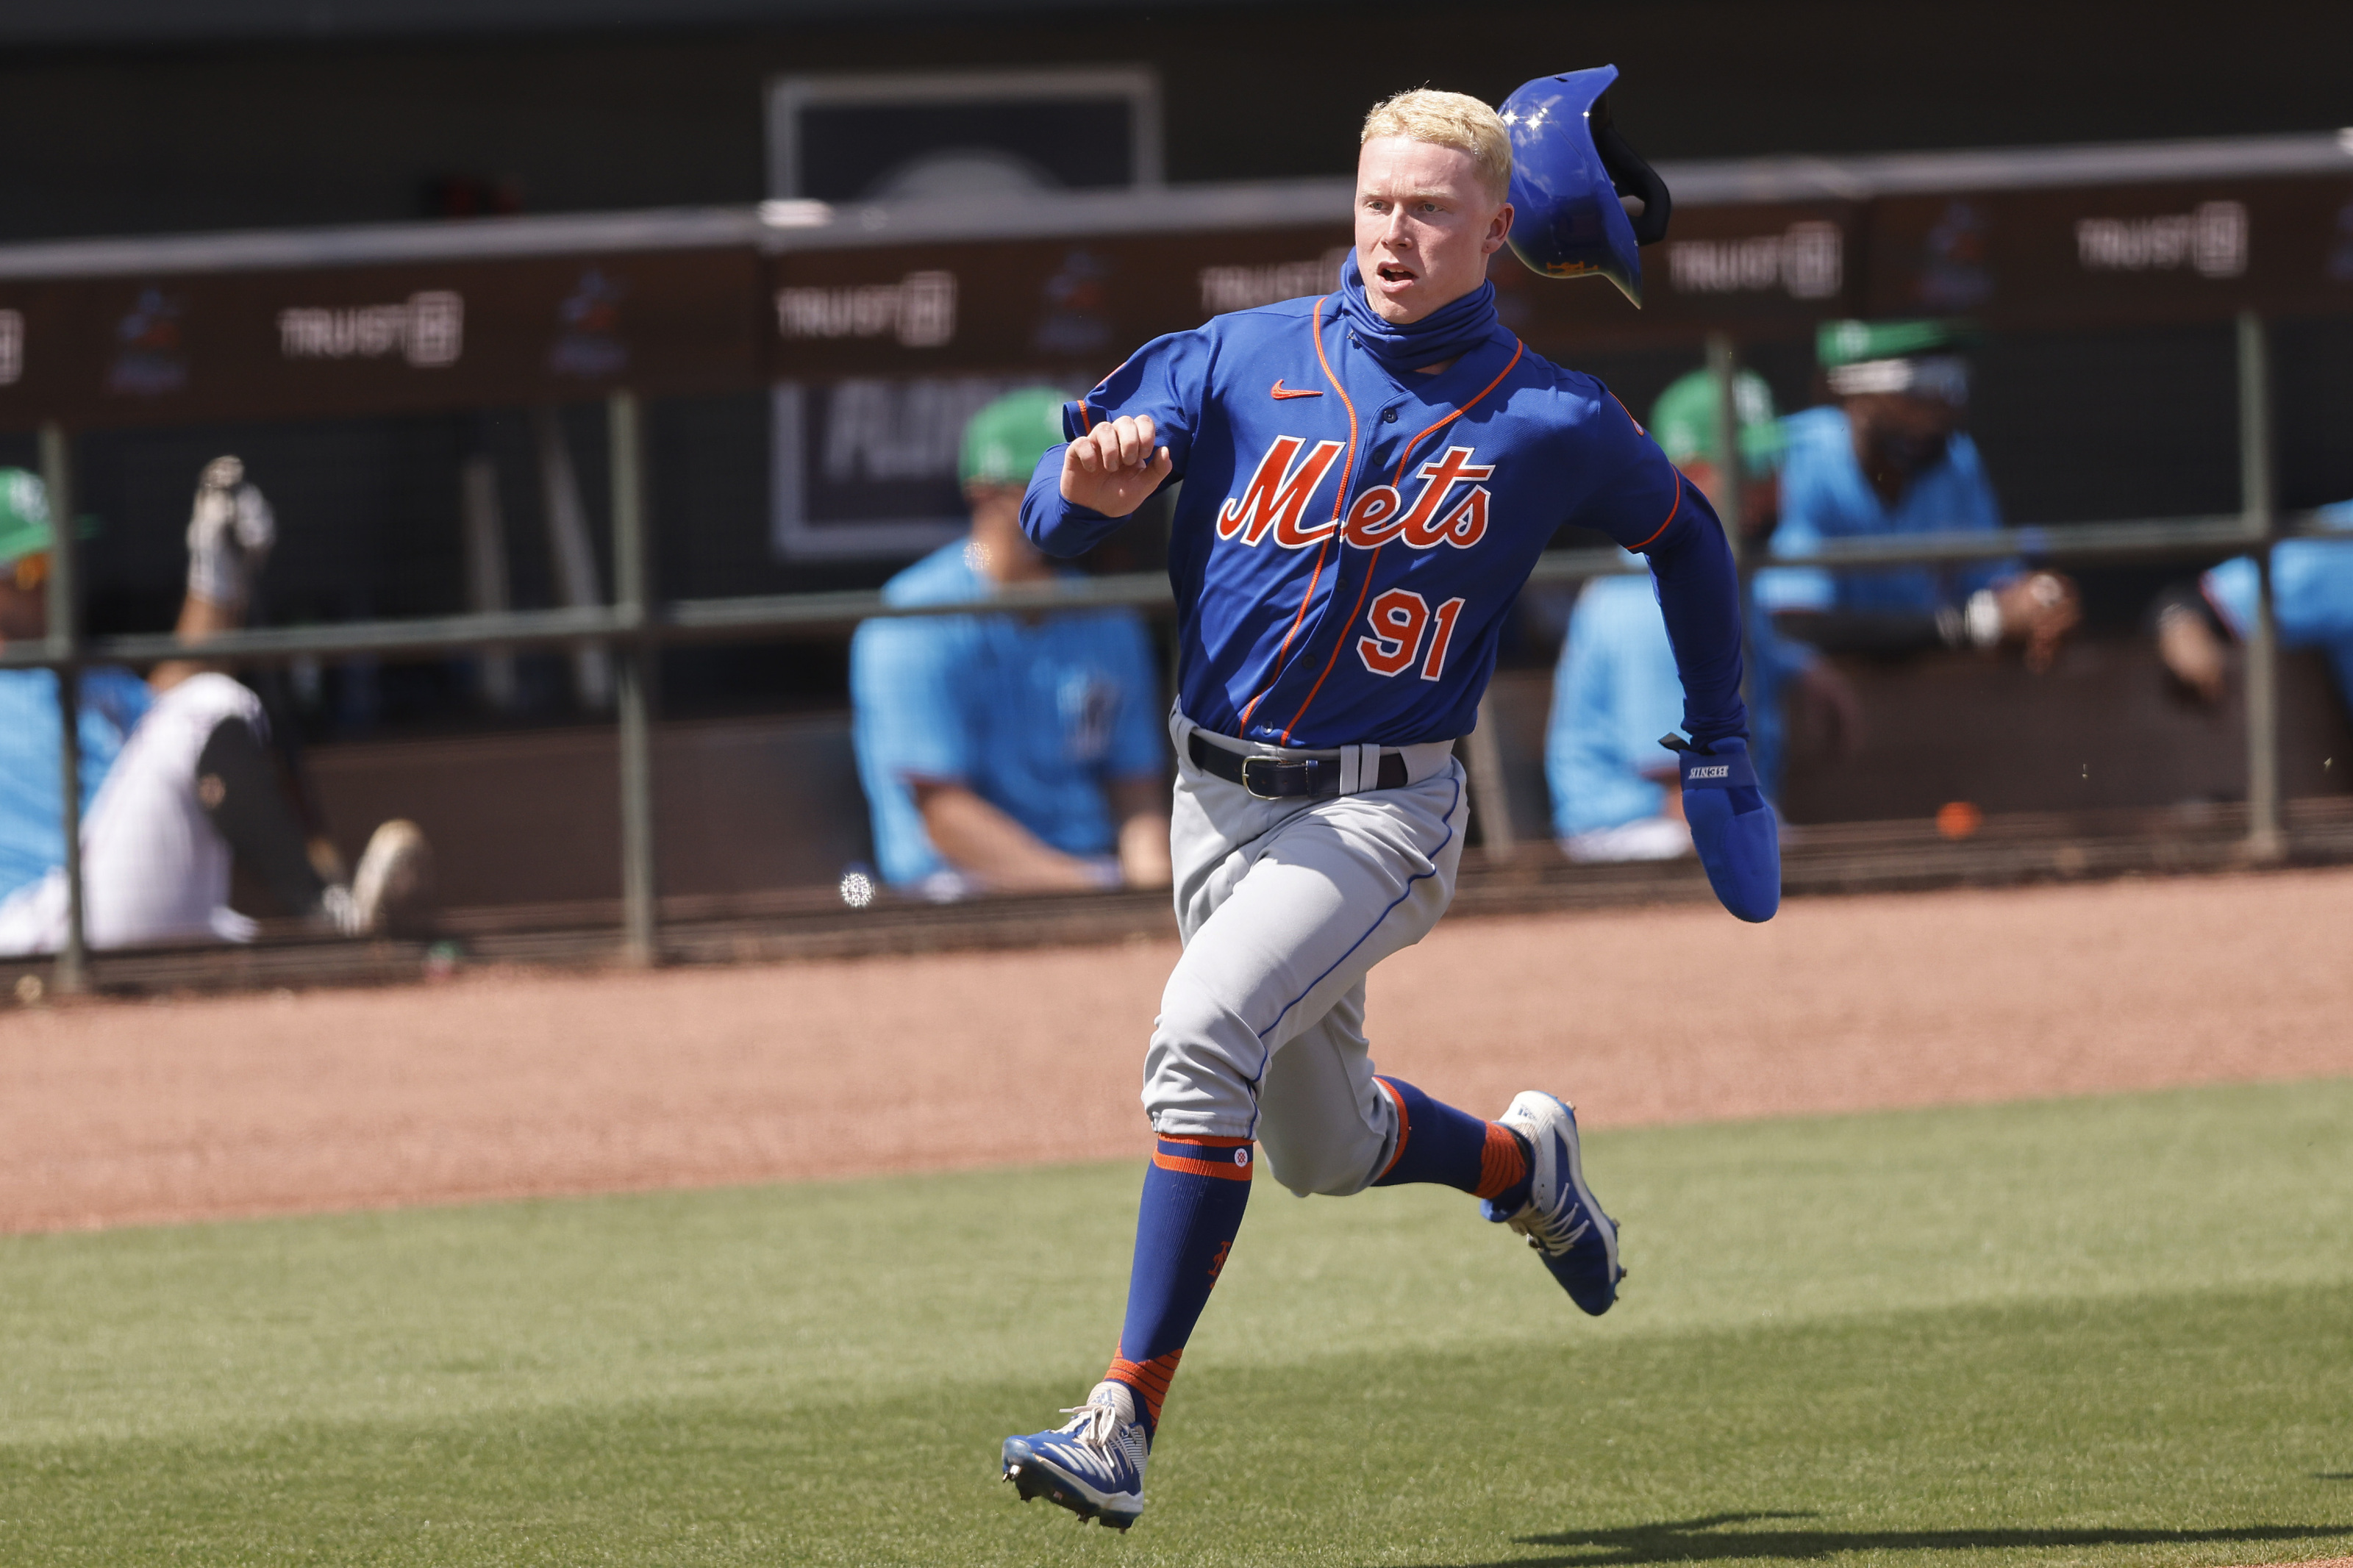 Cubs to call up top prospect, OF Pete Crow-Armstrong